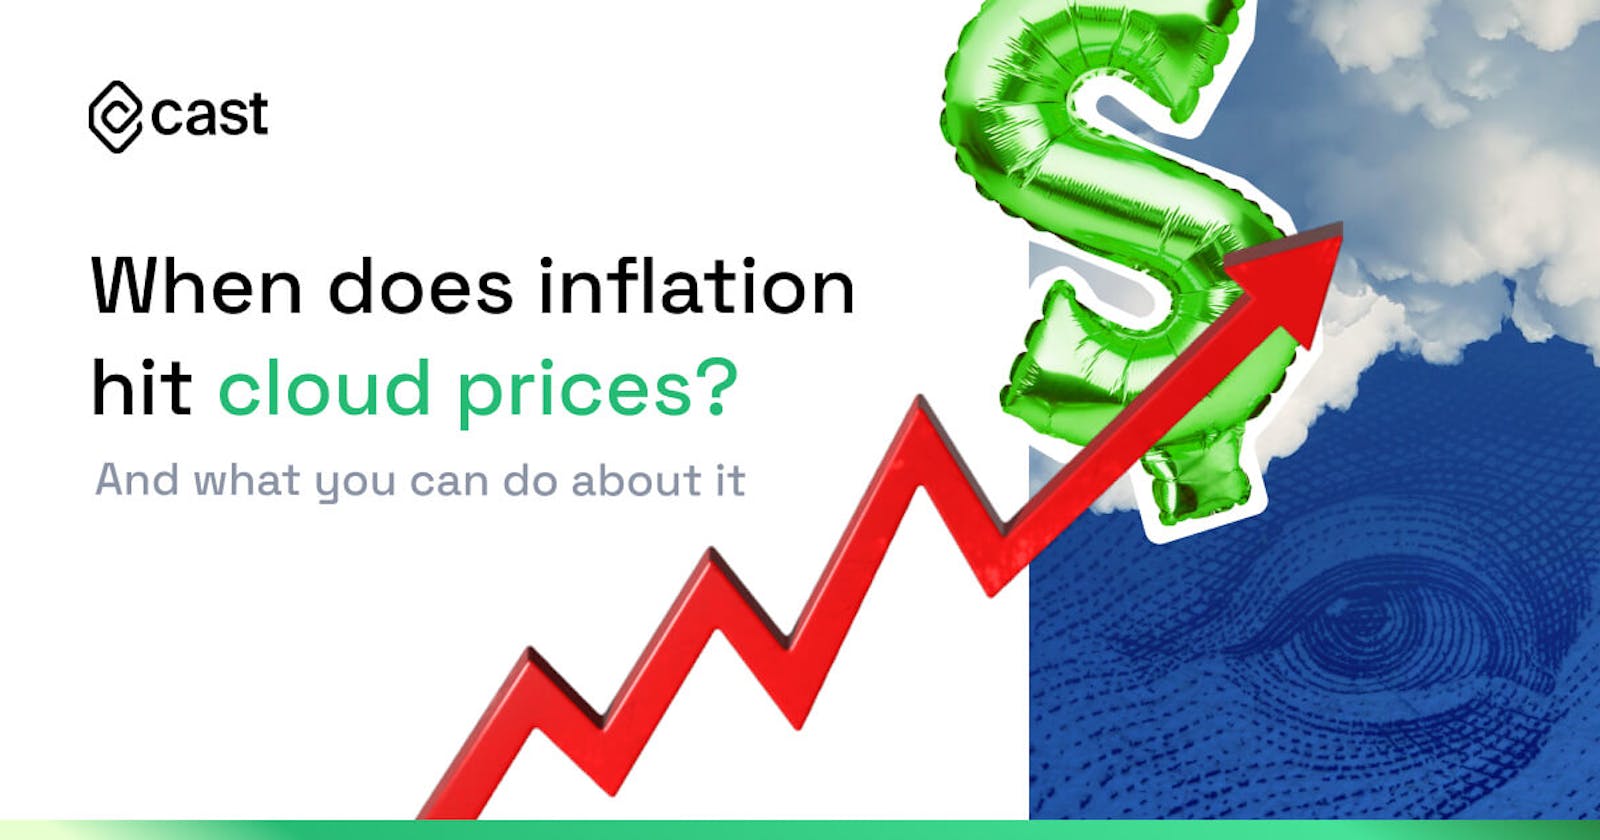 When Does Inflation Hit Cloud Prices and What Can You Do About It?